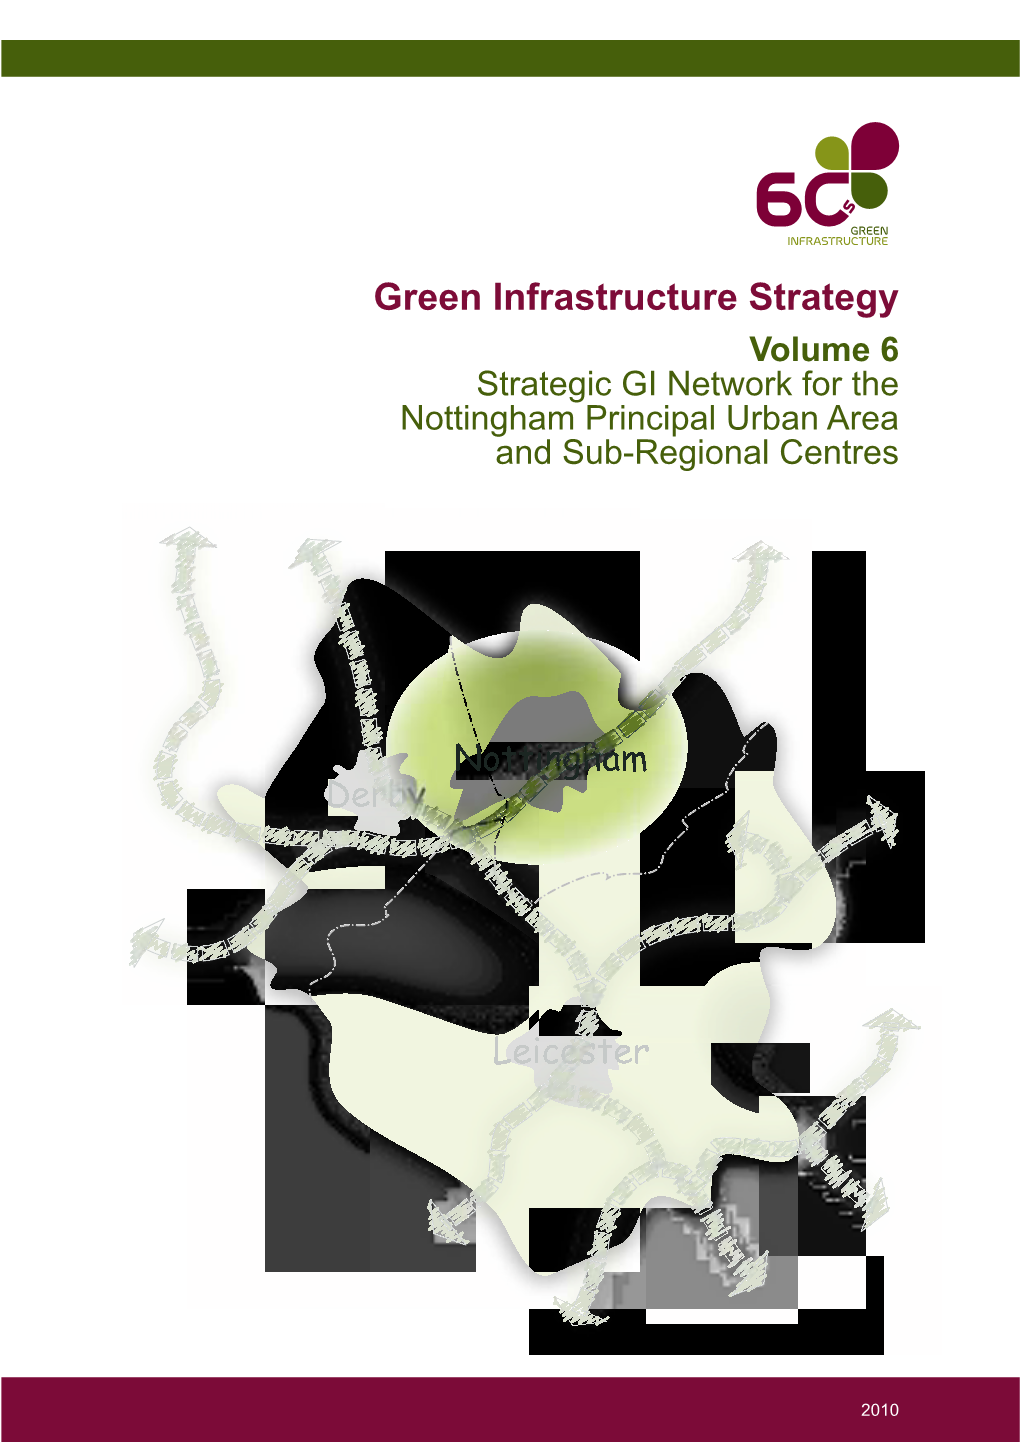 Green Infrastructure Strategy Volume 6 Strategic GI Network for the Nottingham Principal Urban Area and Sub-Regional Centres